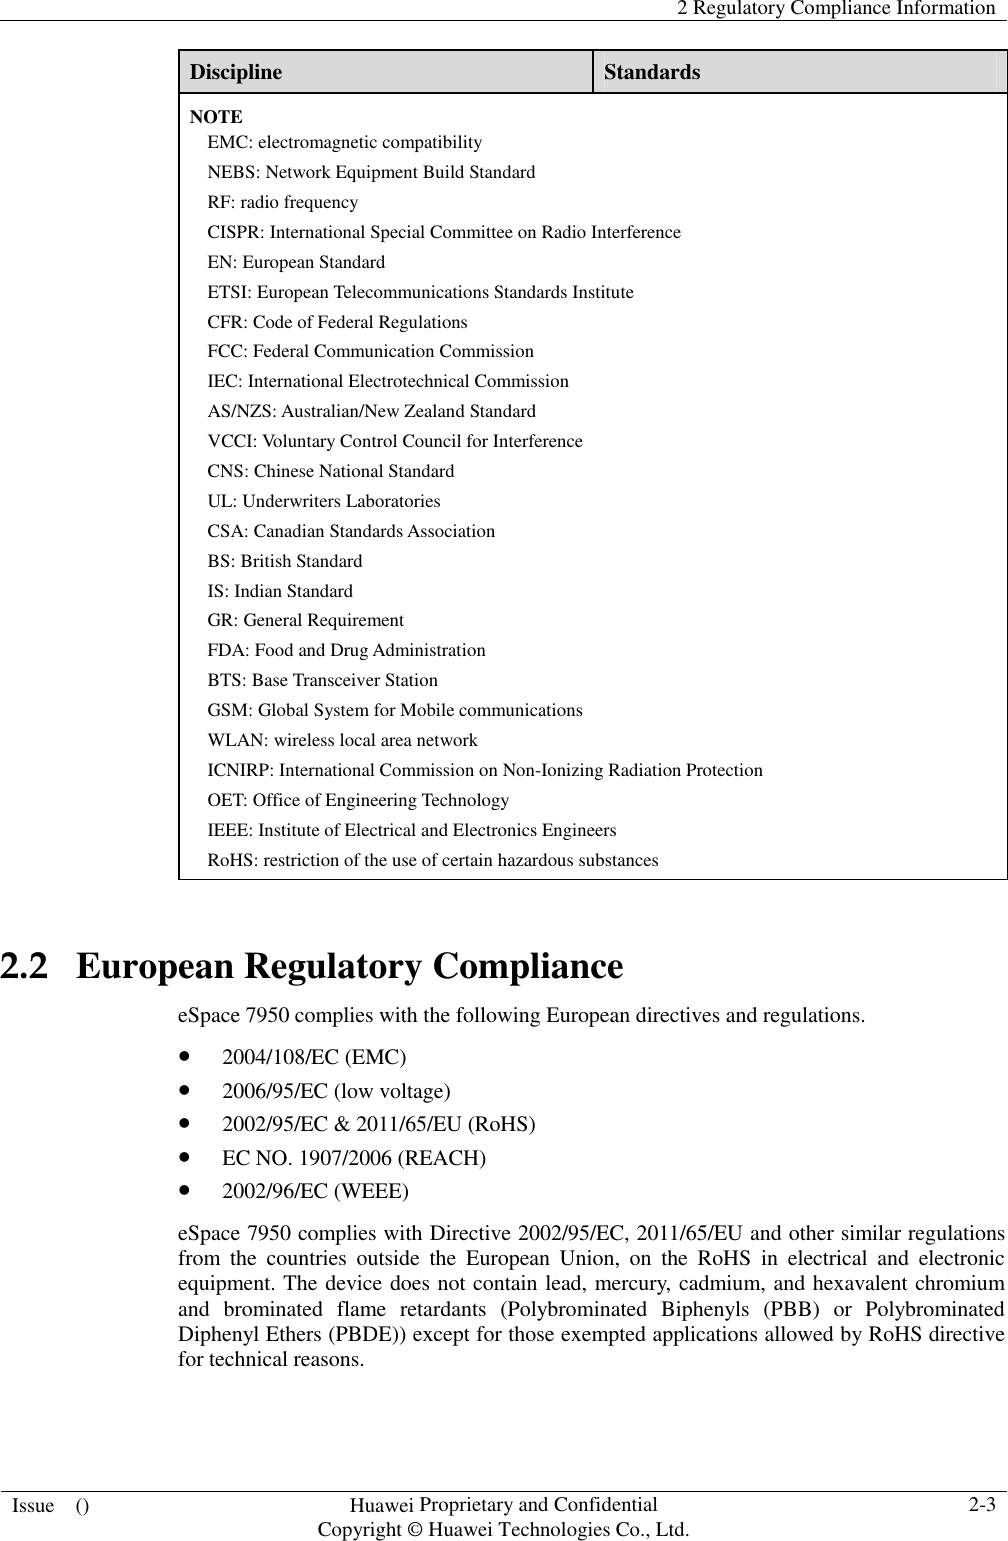    2 Regulatory Compliance Information  Issue    ()  Huawei Proprietary and Confidential                                     Copyright © Huawei Technologies Co., Ltd.  2-3  Discipline  Standards NOTE EMC: electromagnetic compatibility NEBS: Network Equipment Build Standard RF: radio frequency CISPR: International Special Committee on Radio Interference EN: European Standard ETSI: European Telecommunications Standards Institute CFR: Code of Federal Regulations FCC: Federal Communication Commission IEC: International Electrotechnical Commission AS/NZS: Australian/New Zealand Standard VCCI: Voluntary Control Council for Interference CNS: Chinese National Standard UL: Underwriters Laboratories CSA: Canadian Standards Association BS: British Standard IS: Indian Standard GR: General Requirement FDA: Food and Drug Administration BTS: Base Transceiver Station GSM: Global System for Mobile communications WLAN: wireless local area network ICNIRP: International Commission on Non-Ionizing Radiation Protection OET: Office of Engineering Technology IEEE: Institute of Electrical and Electronics Engineers RoHS: restriction of the use of certain hazardous substances 2.2   European Regulatory Compliance eSpace 7950 complies with the following European directives and regulations.  2004/108/EC (EMC)  2006/95/EC (low voltage)  2002/95/EC &amp; 2011/65/EU (RoHS)  EC NO. 1907/2006 (REACH)  2002/96/EC (WEEE) eSpace 7950 complies with Directive 2002/95/EC, 2011/65/EU and other similar regulations from  the  countries  outside  the  European  Union,  on  the  RoHS  in  electrical  and  electronic equipment. The device does not contain lead, mercury, cadmium, and hexavalent chromium and  brominated  flame  retardants  (Polybrominated  Biphenyls  (PBB)  or  Polybrominated Diphenyl Ethers (PBDE)) except for those exempted applications allowed by RoHS directive for technical reasons.   